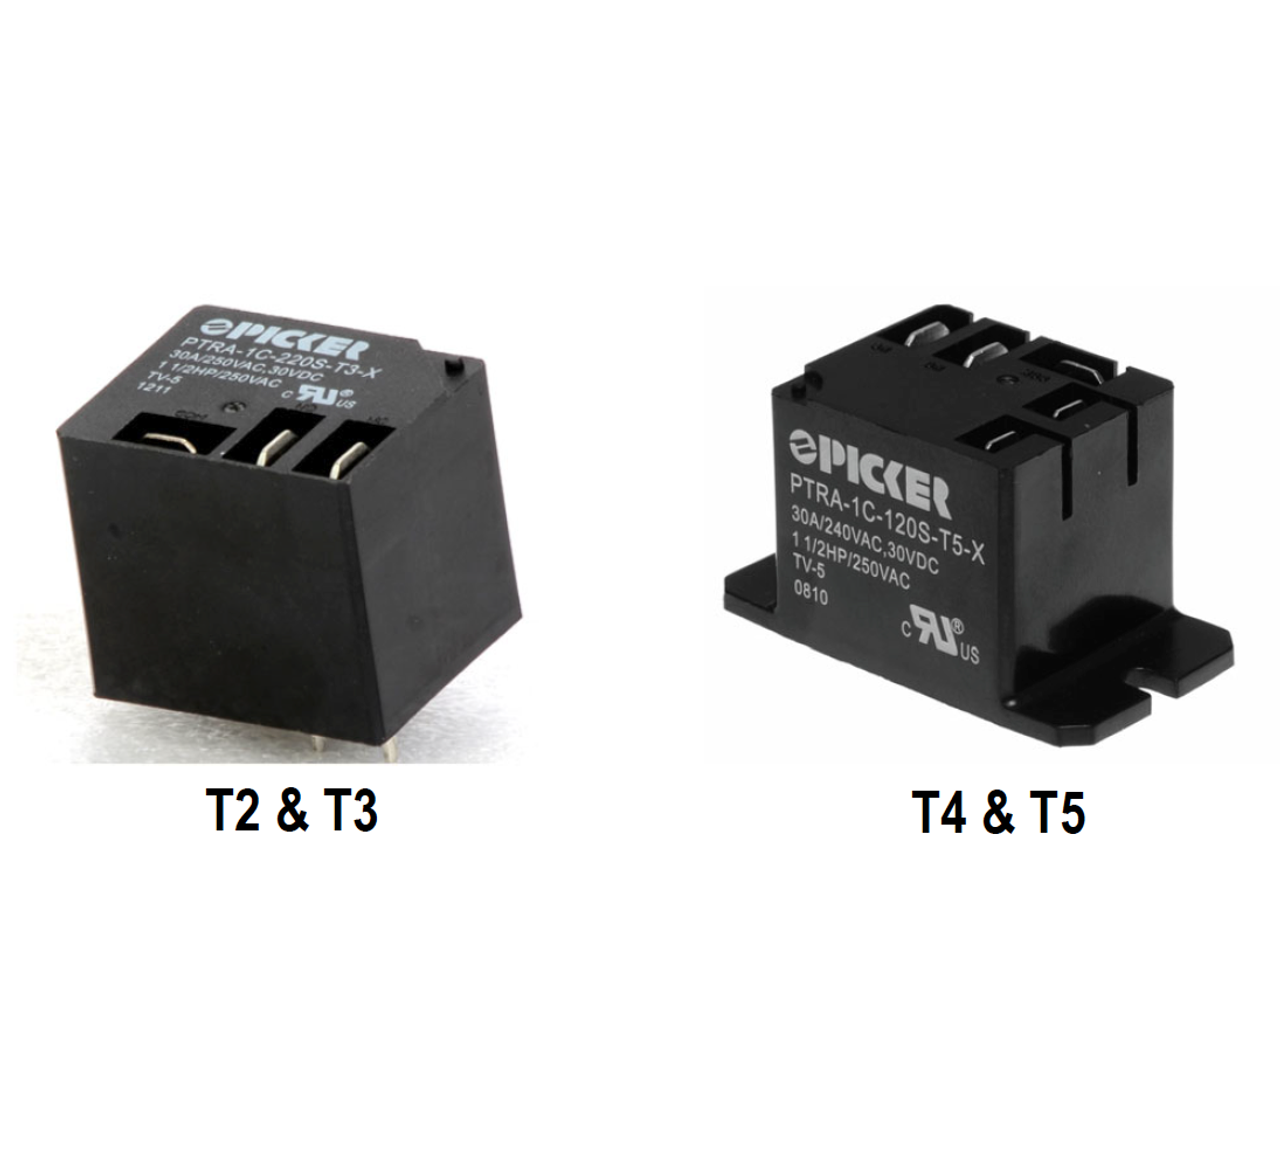 Picker PTRA-1A-120CT-T3-X67 Power Relays